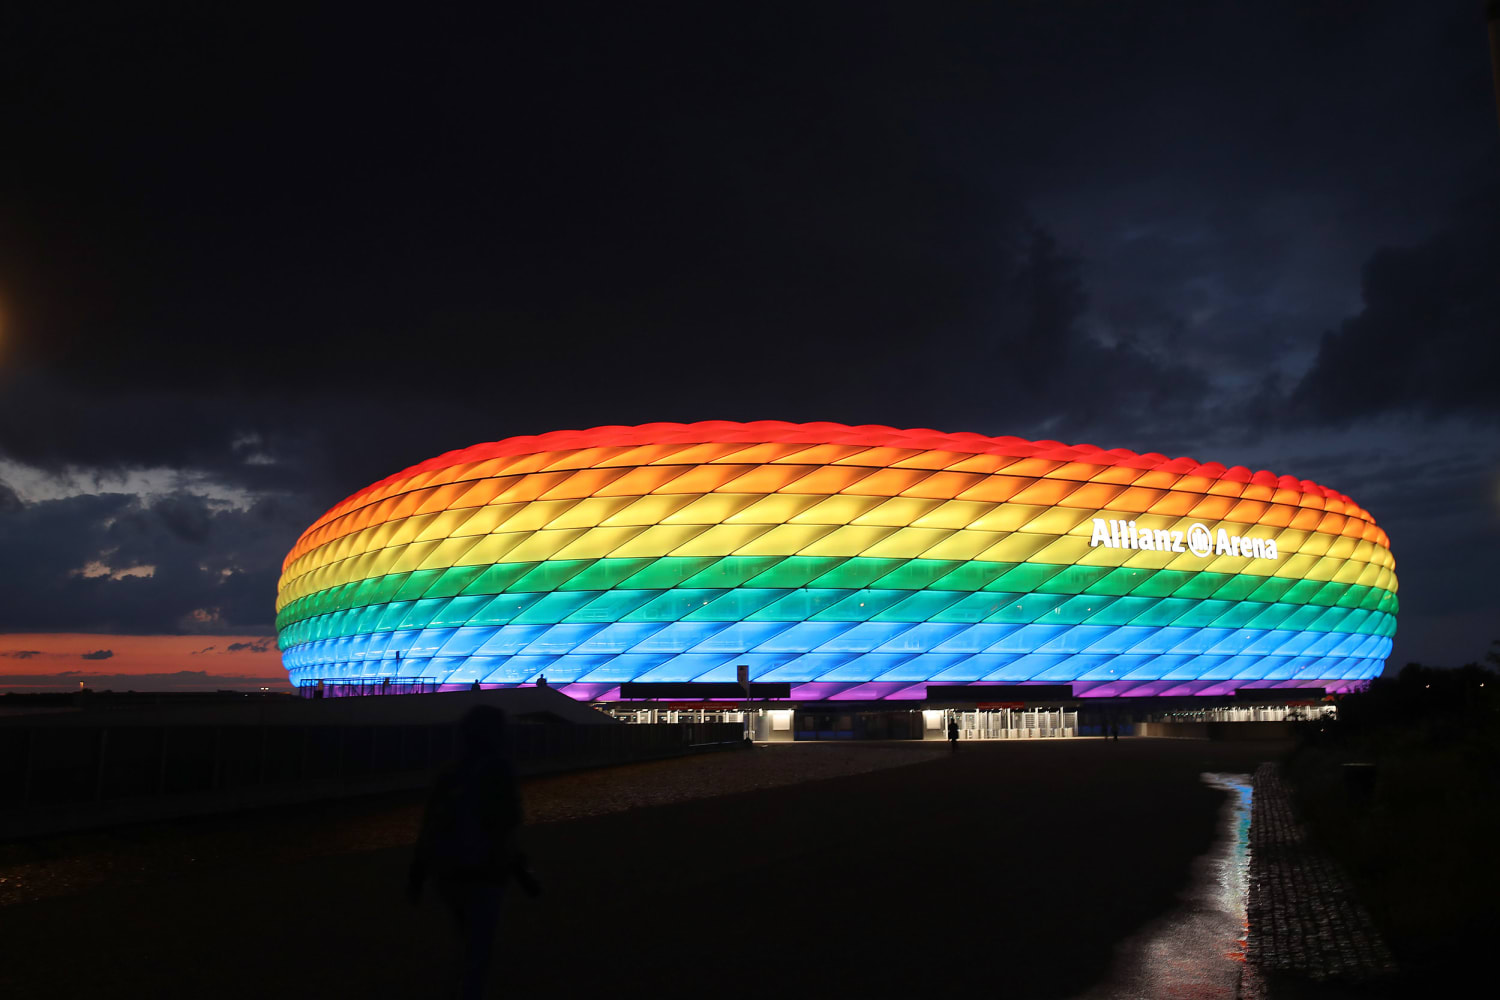 Euro 2020 soccer stadium's LGBT rainbow plan rejected for being too 'political'